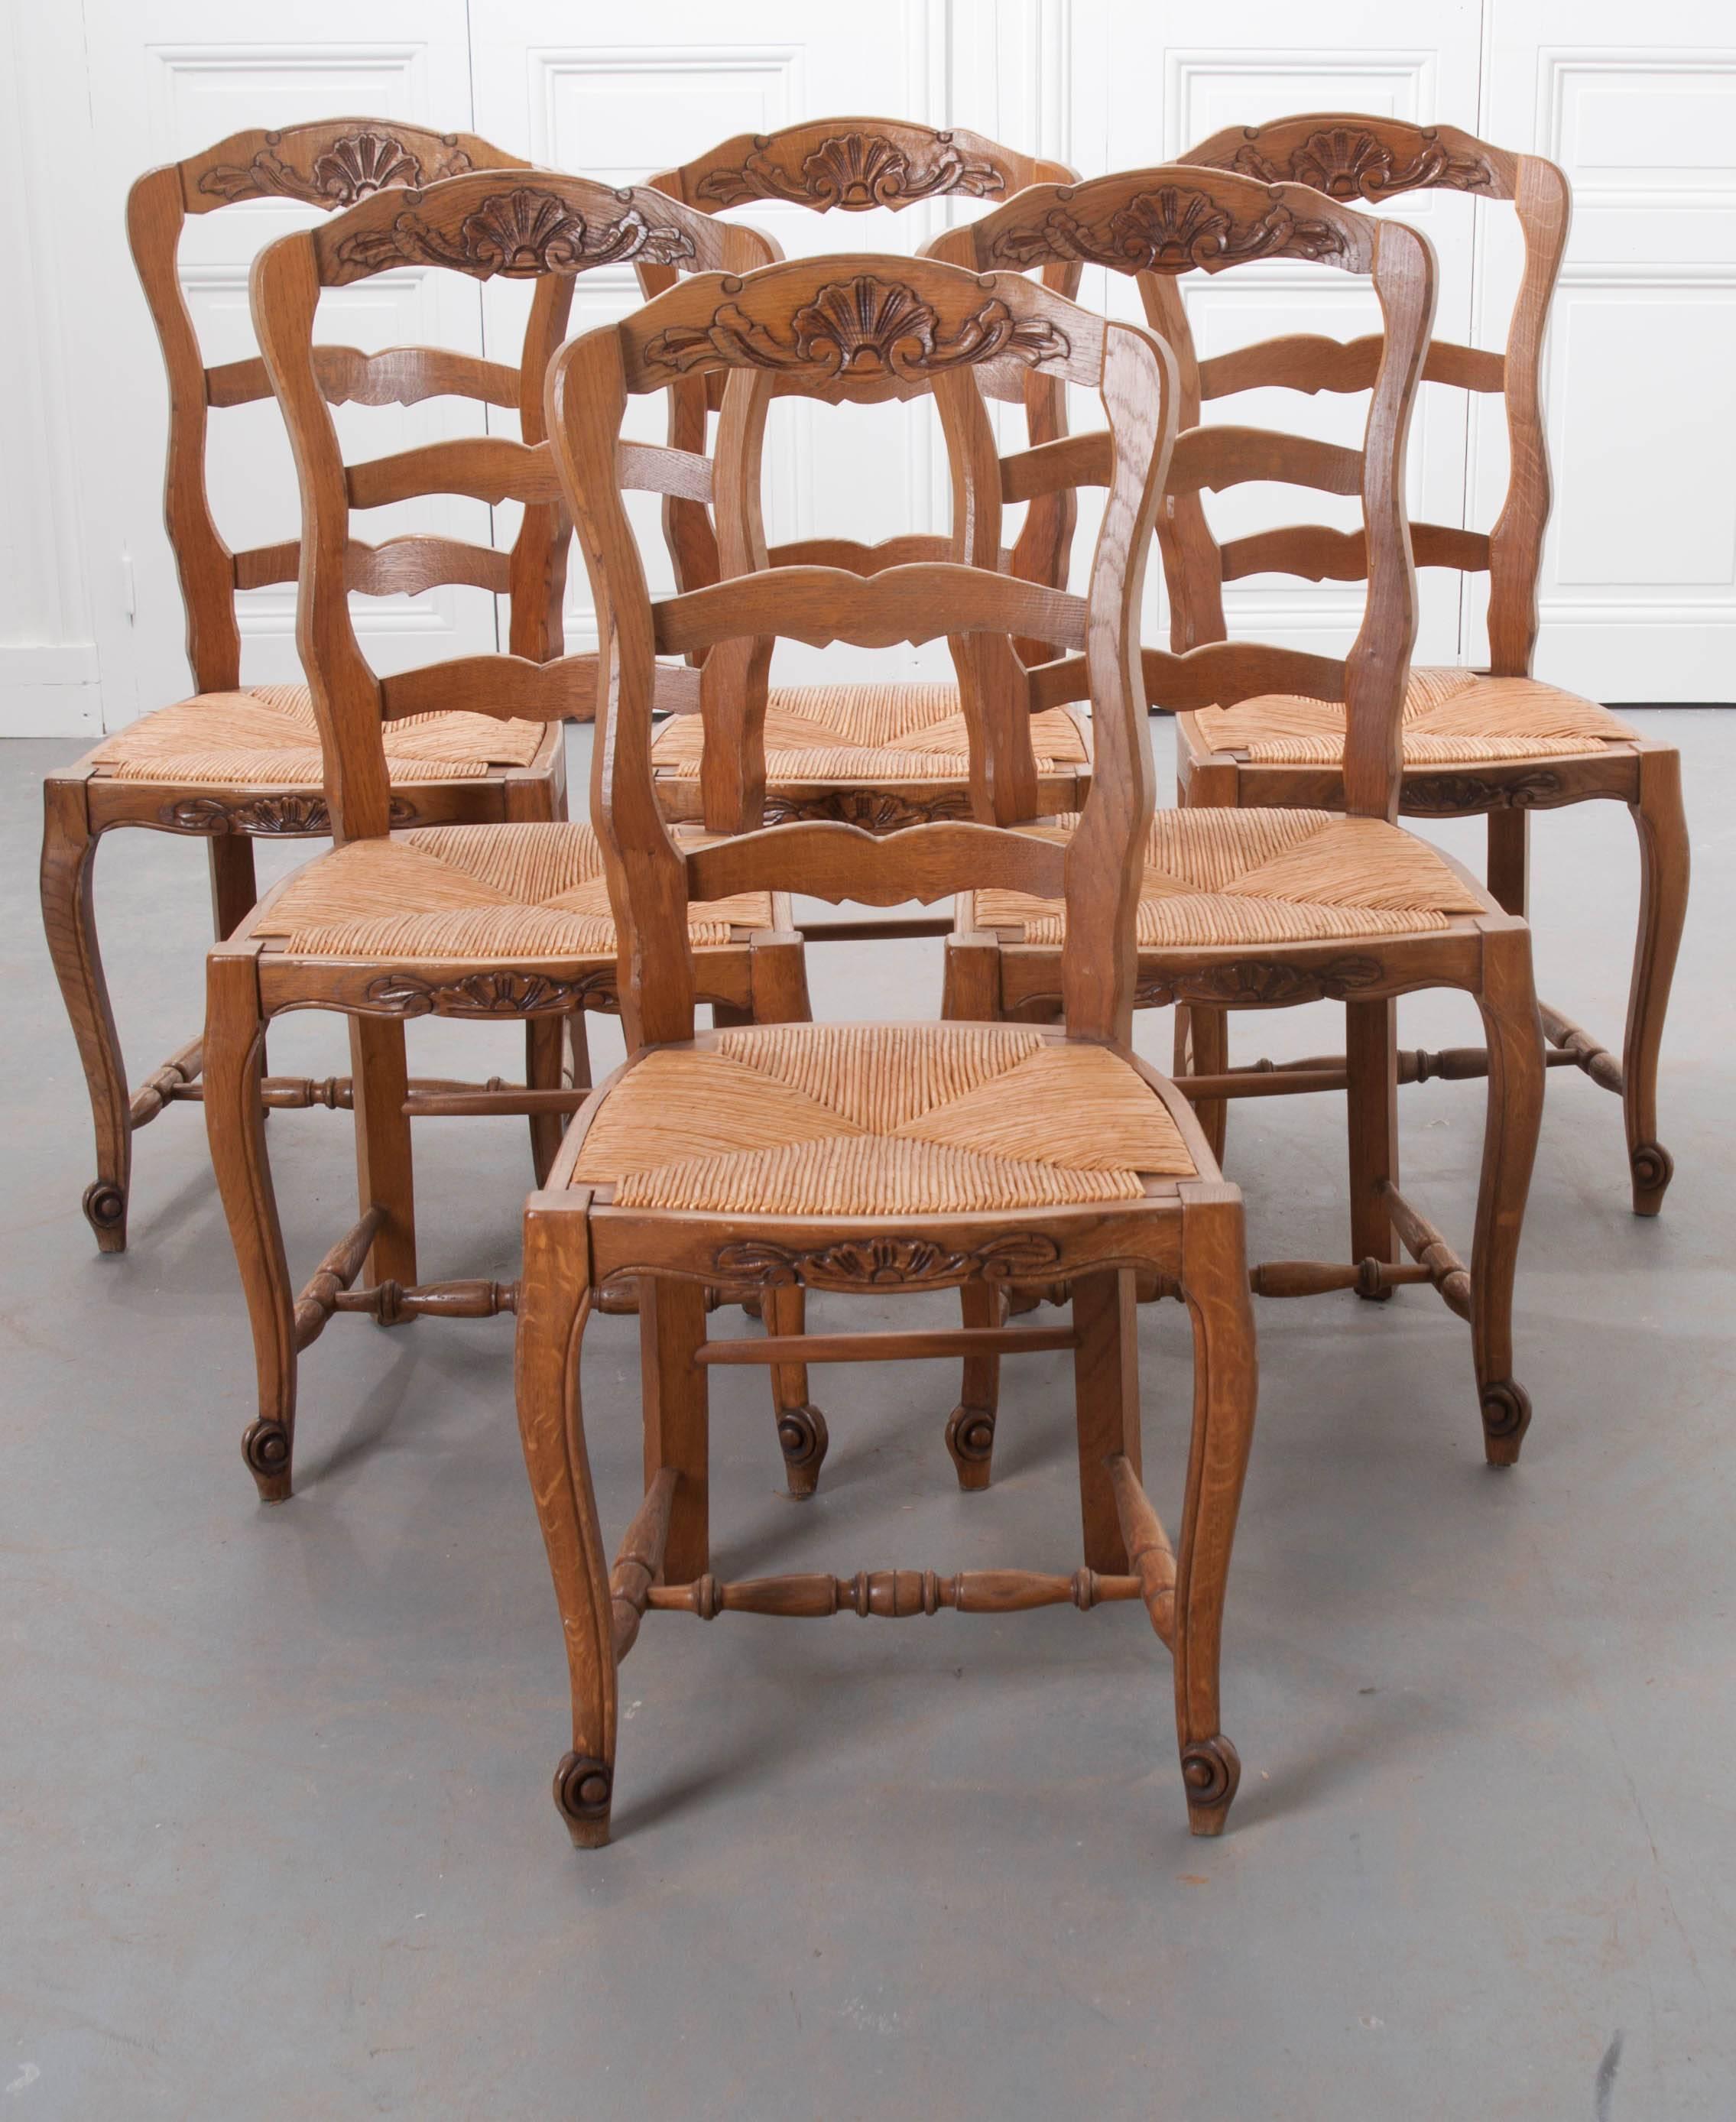 A charming set of six French oak ladder back chairs made in the 1940s. A beautiful carved shell cartouche with foliate accents graces the chairs' top rails. The rush seats have a height of 18